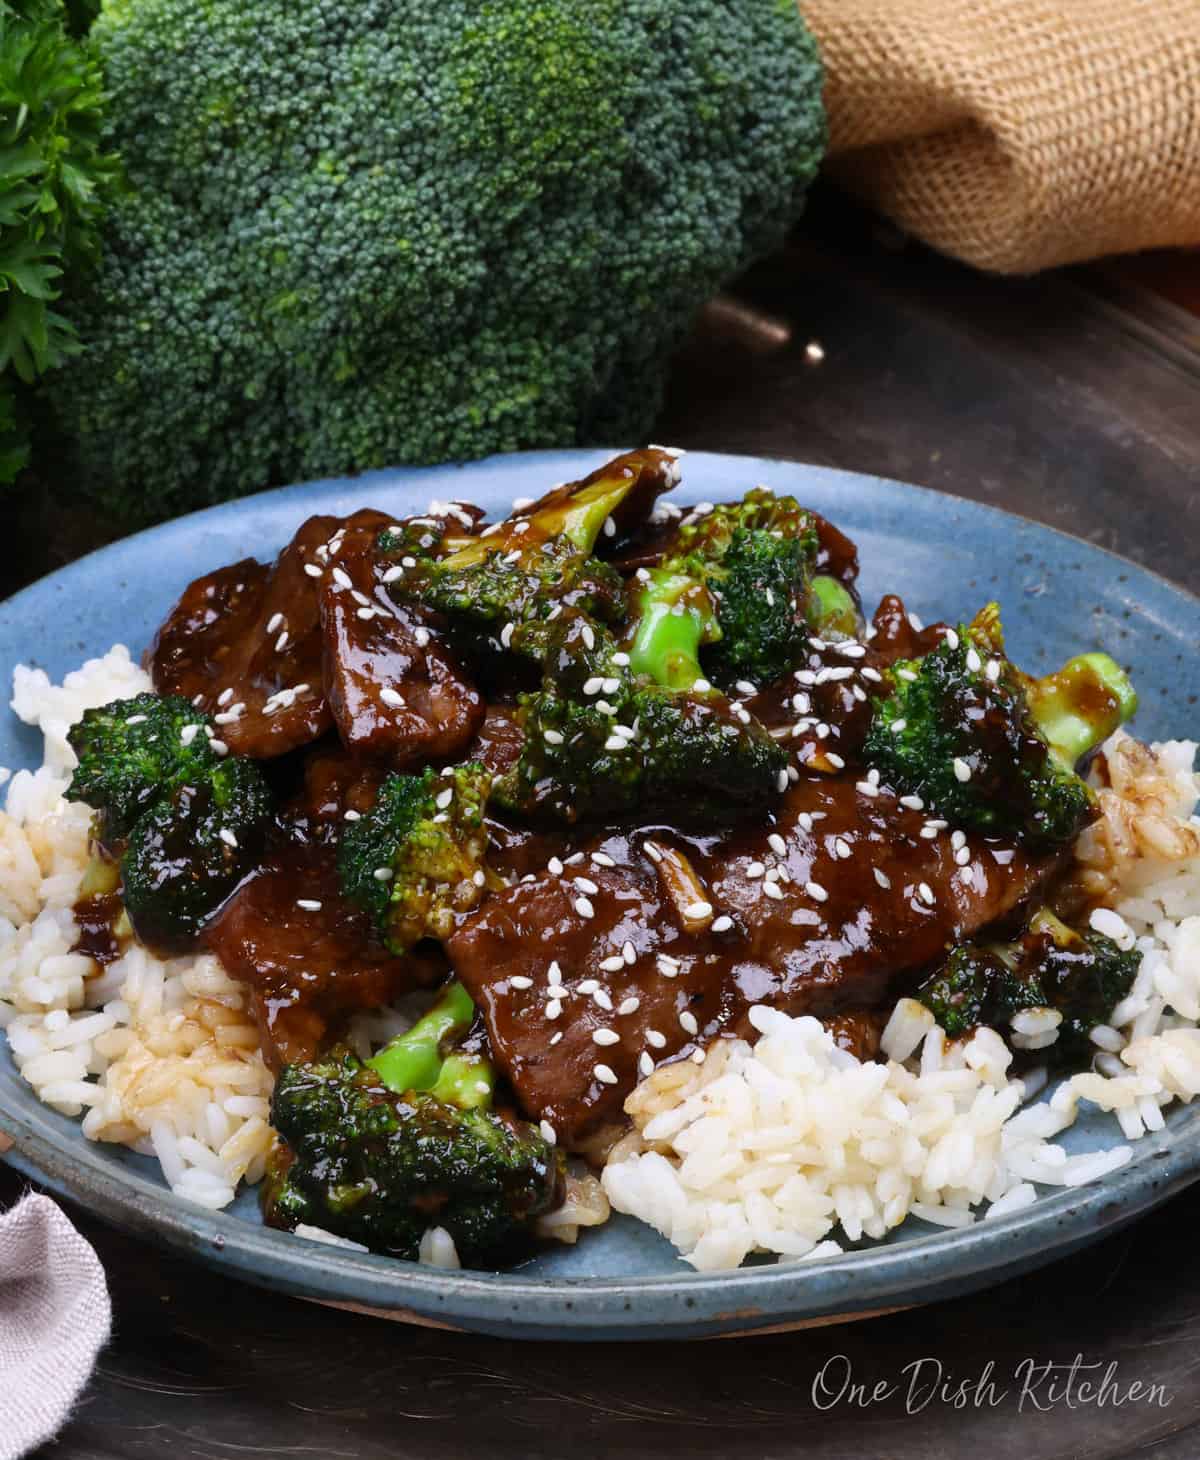 beef and broccoli over white rice on a blue plate.